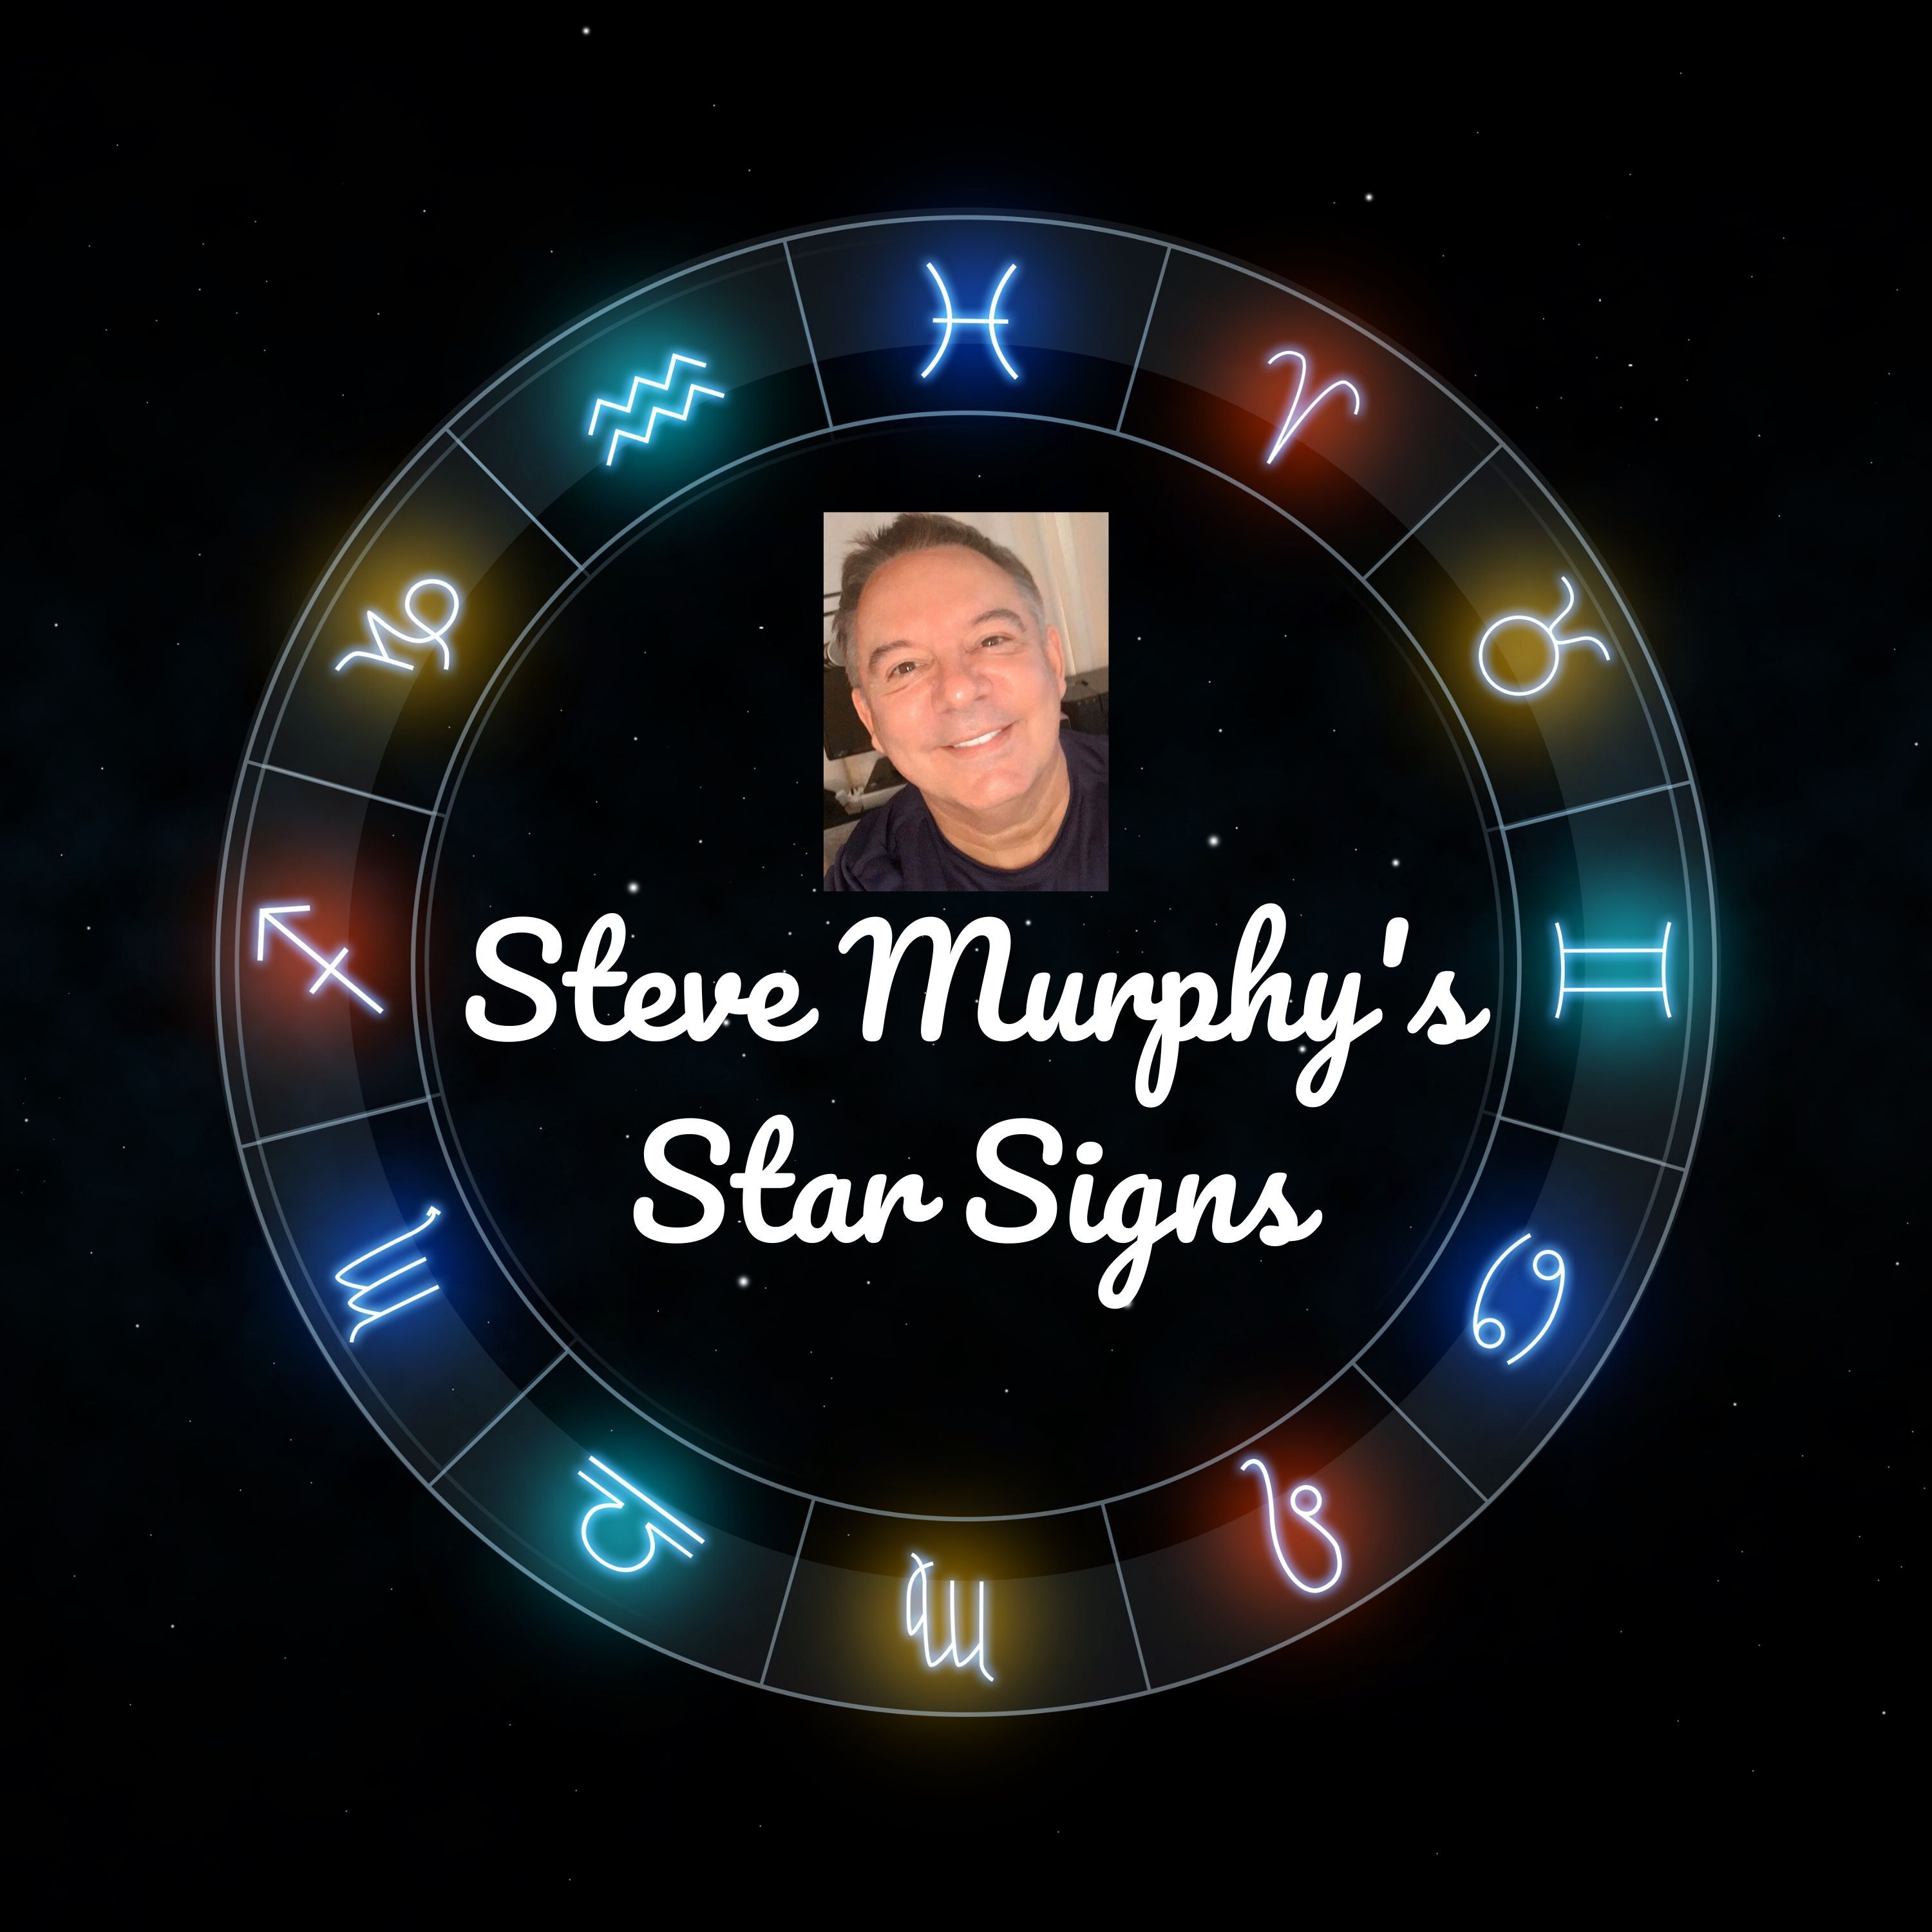 Your Star Signs Report wc 22nd June 2020 | Astrology & Numerology